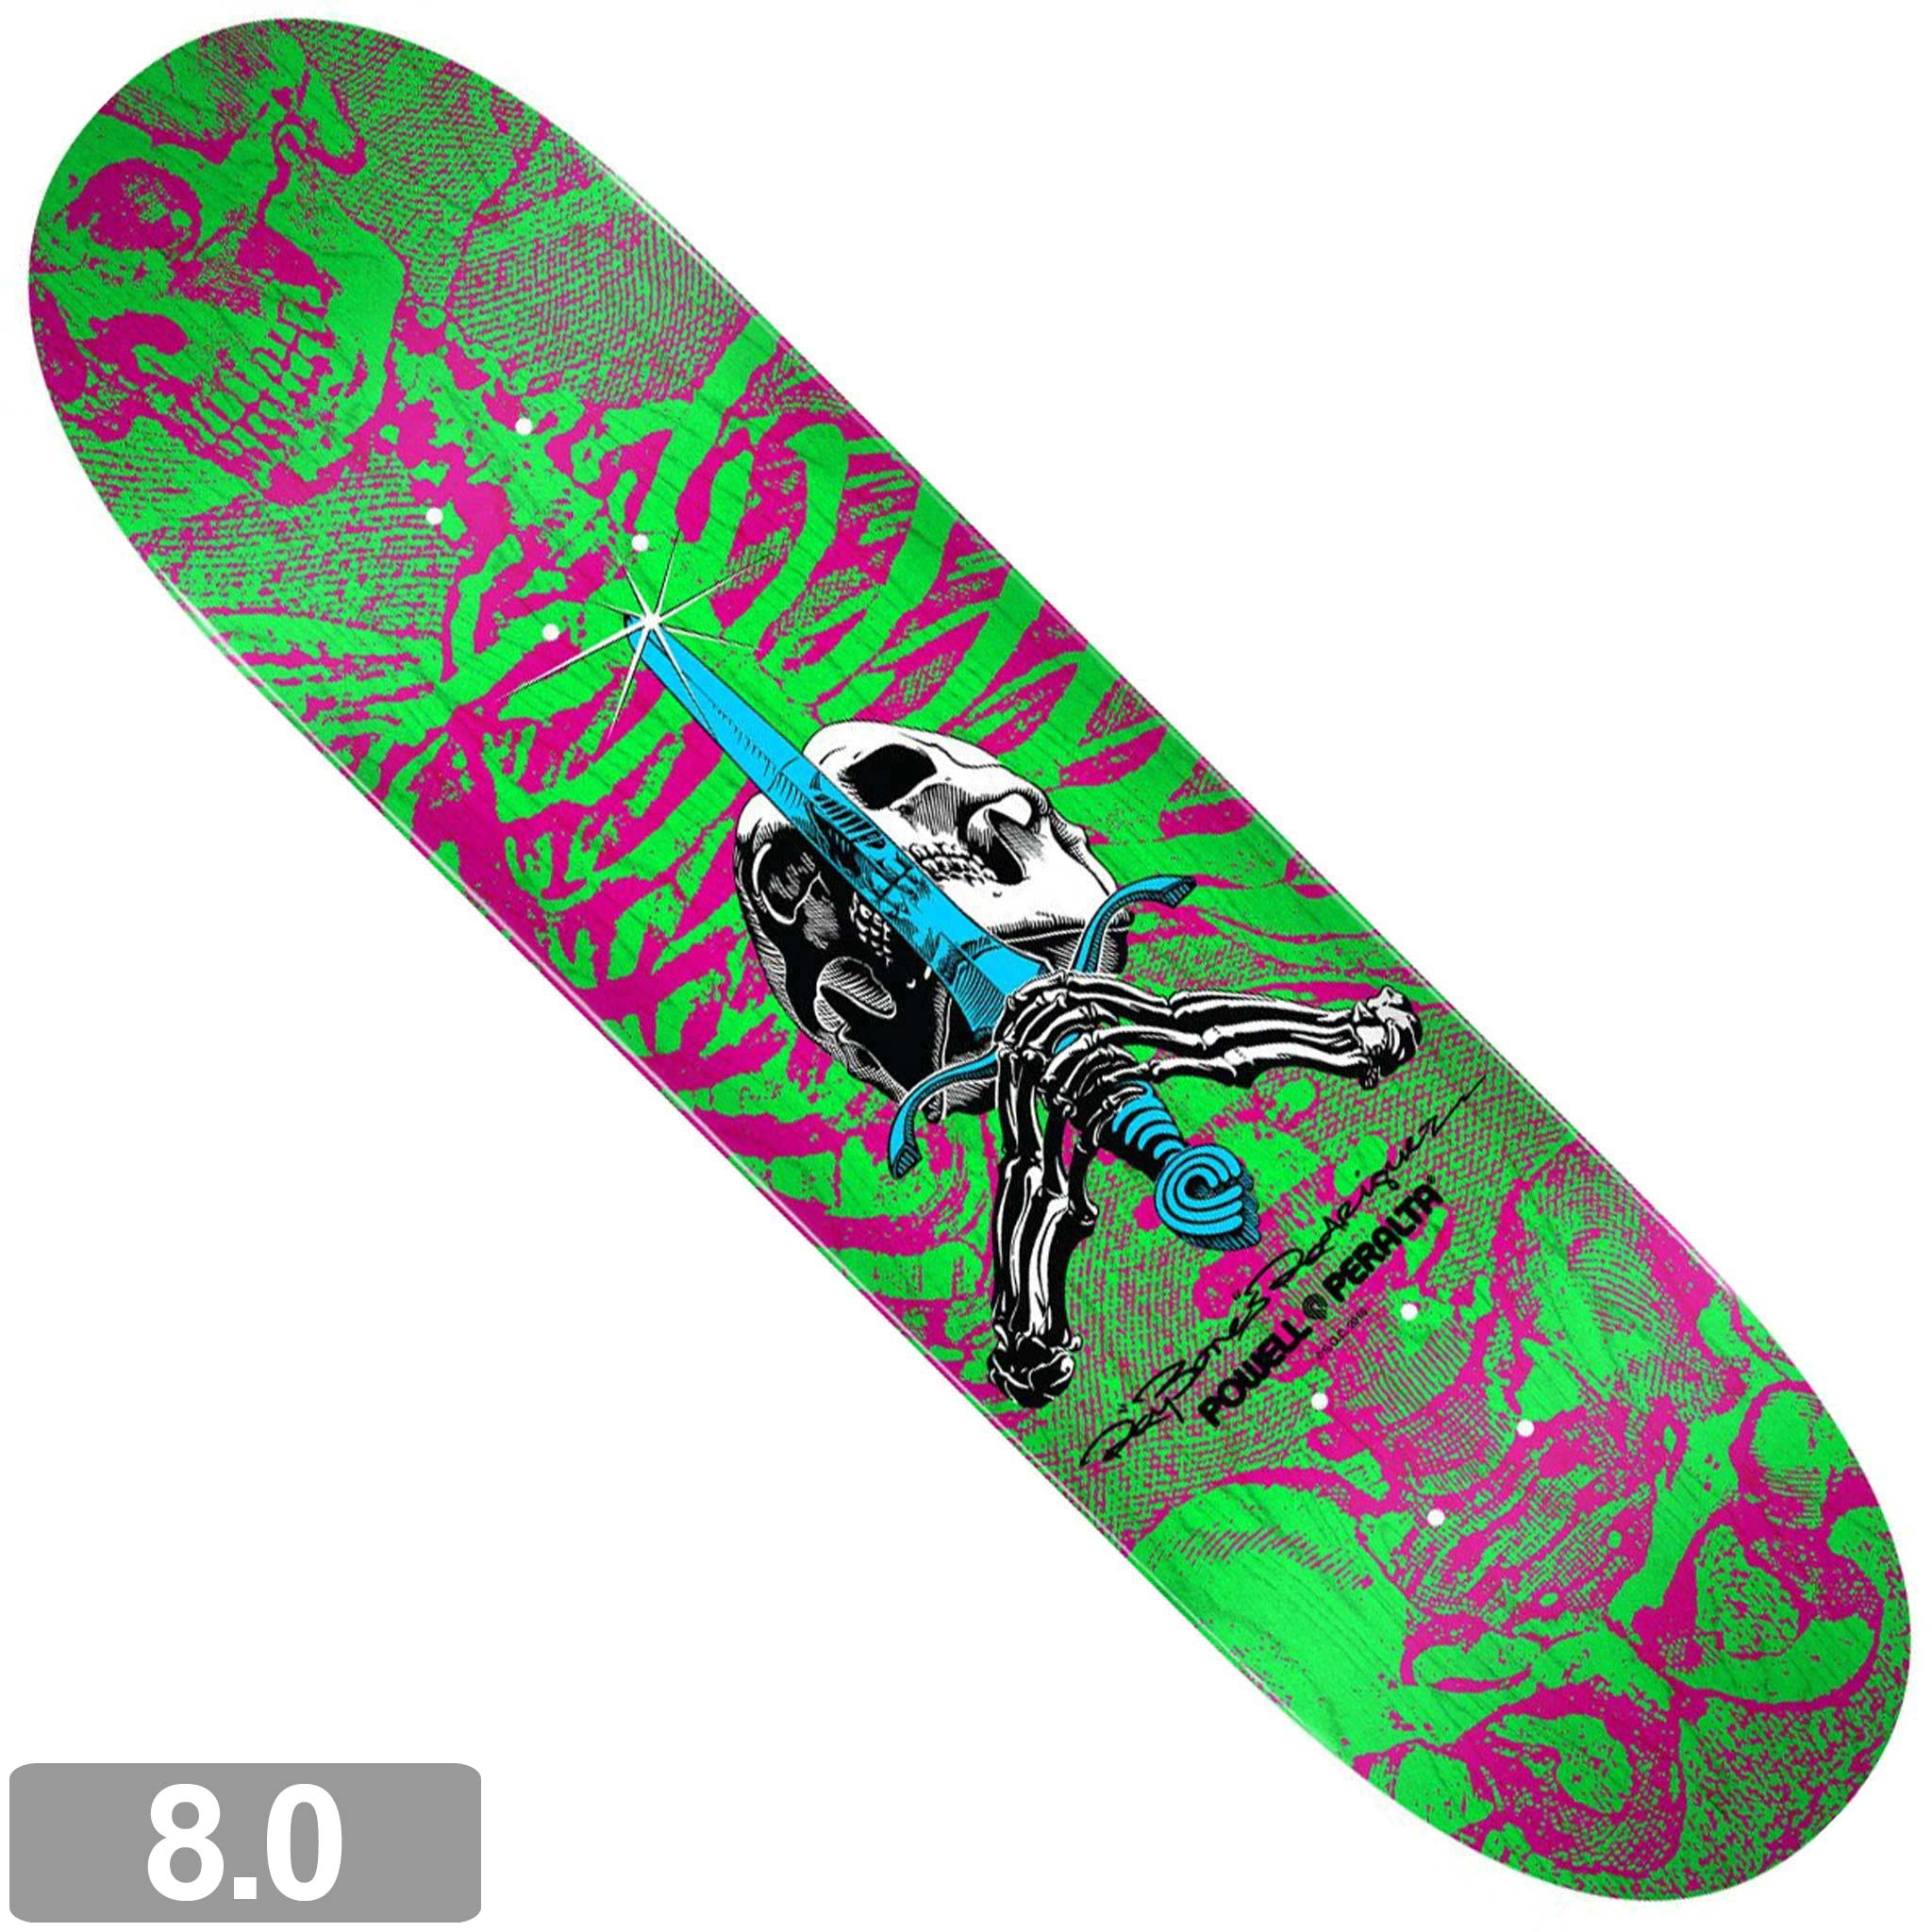 POWELL-PERALTA SKULL AND SWORD PINK / GREEN SHAPE 247 DECK 8.0